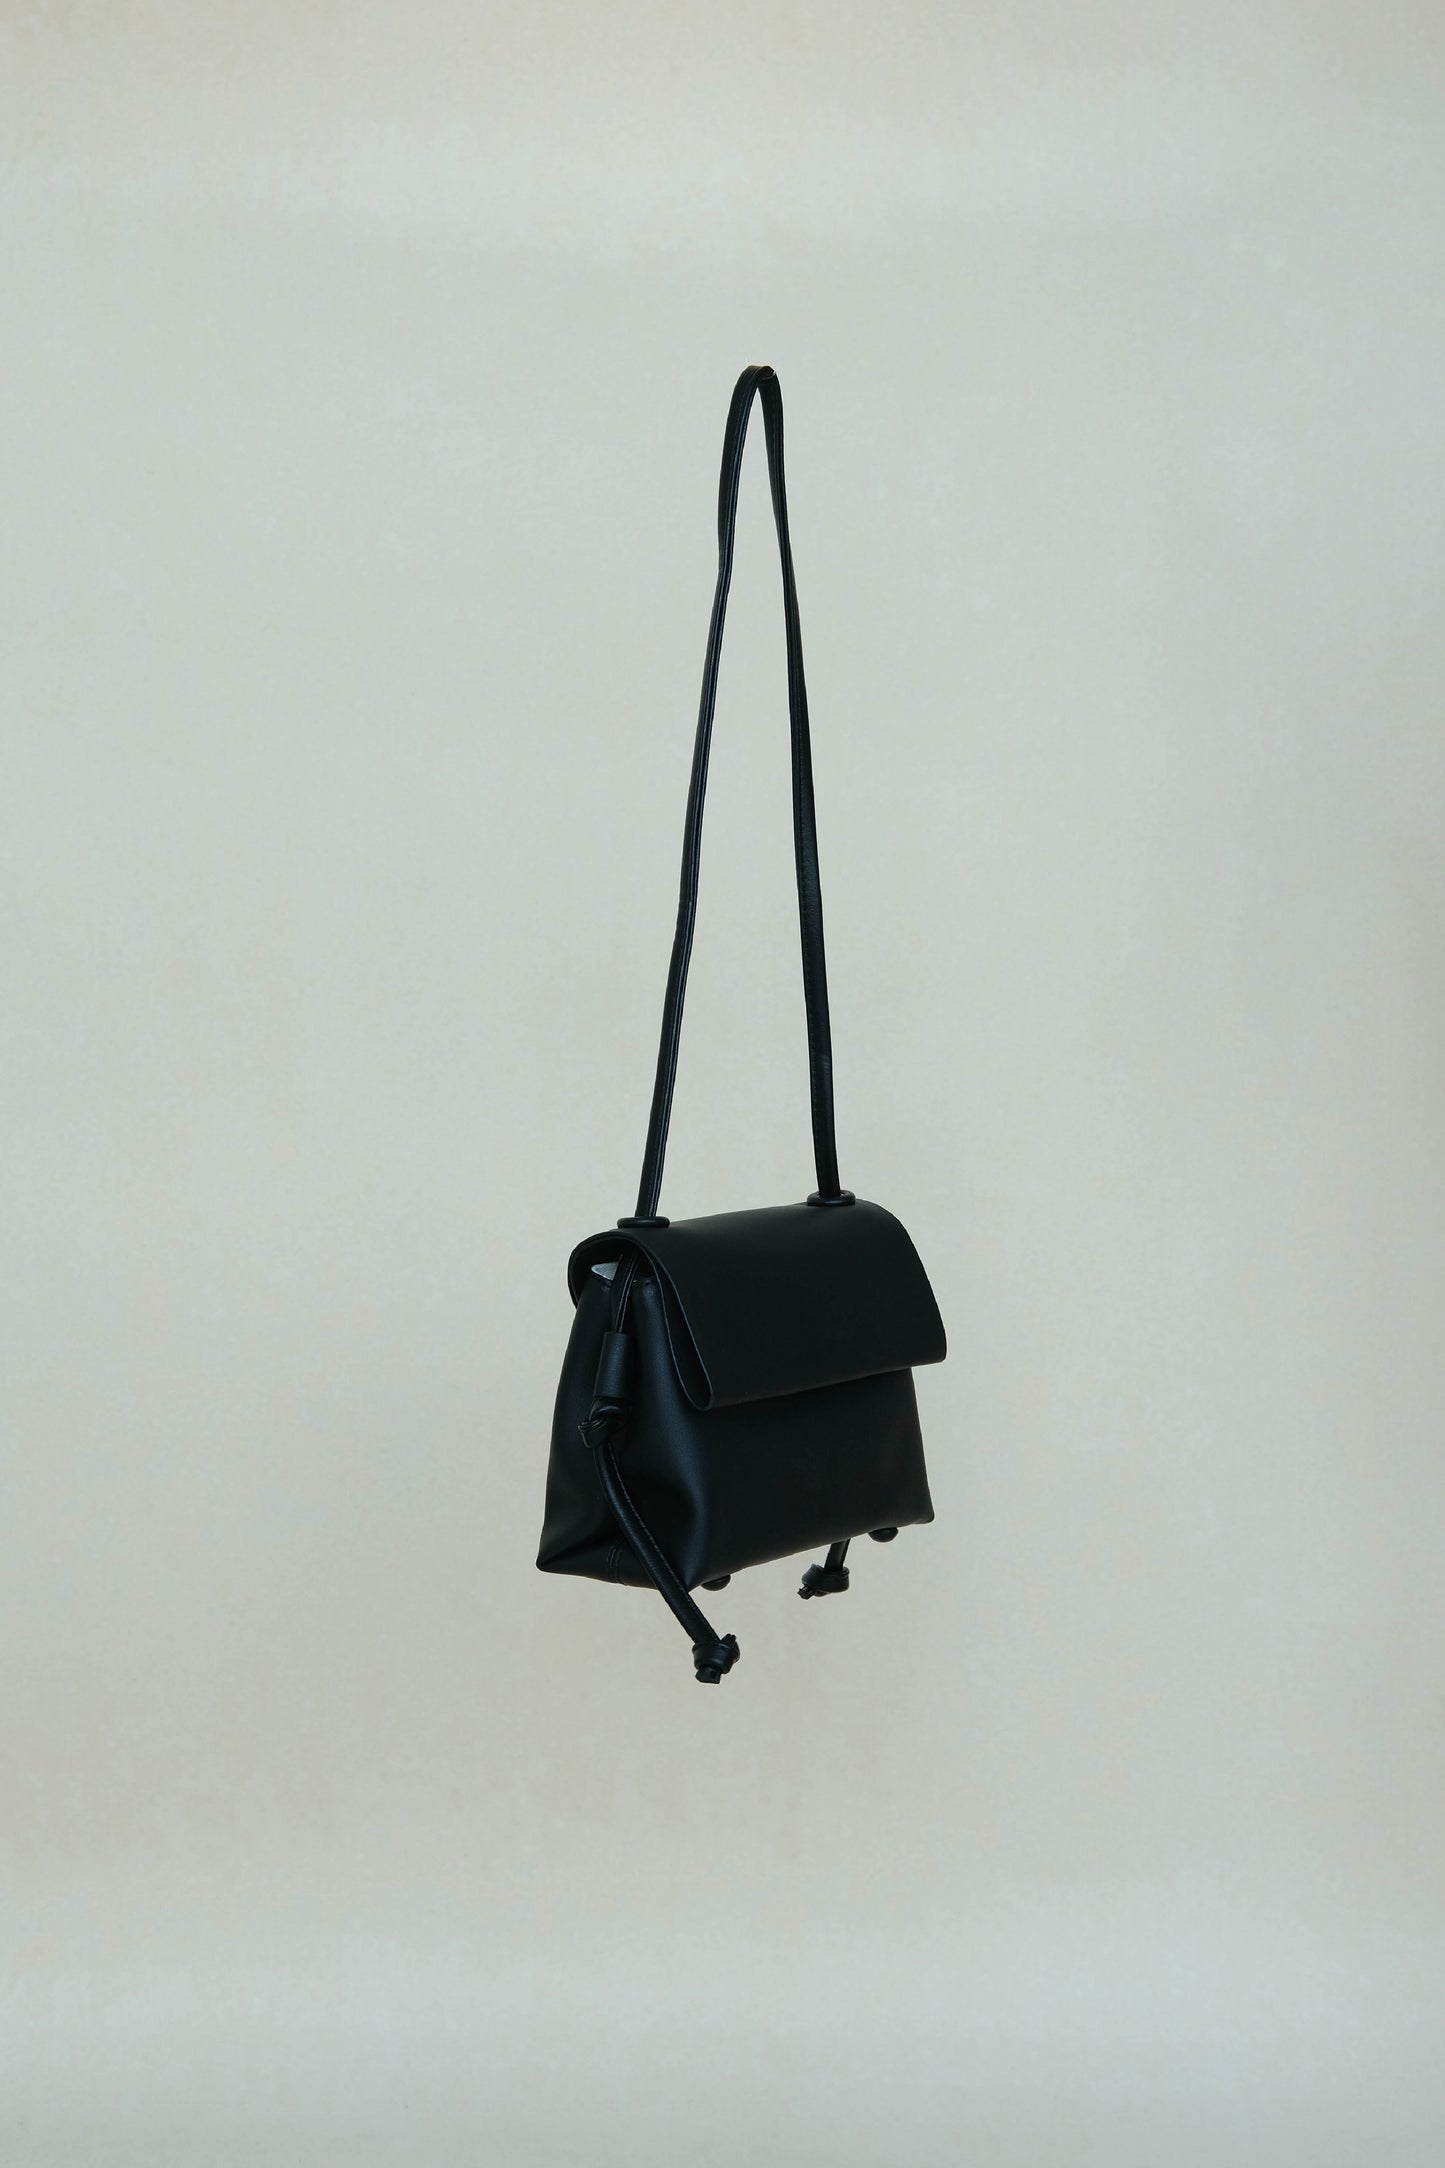 French one-shoulder cross-body vintage small square bag in classic black